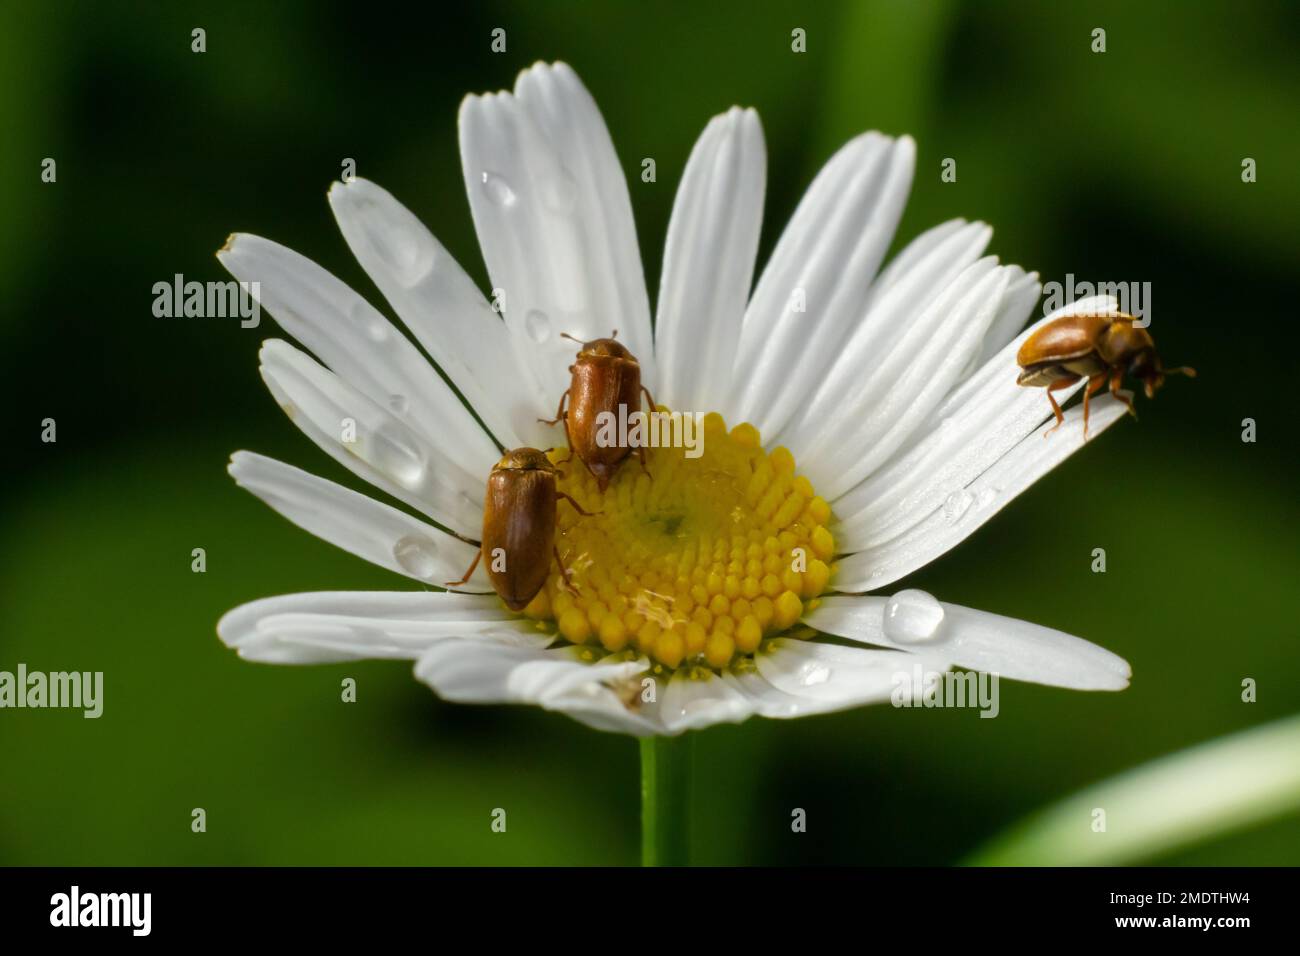 Raspberry beetle, Byturus tomentosus, on a chamomile flower. These are beetles from the fruit worm family Byturidae, the main pest that affects raspbe Stock Photo